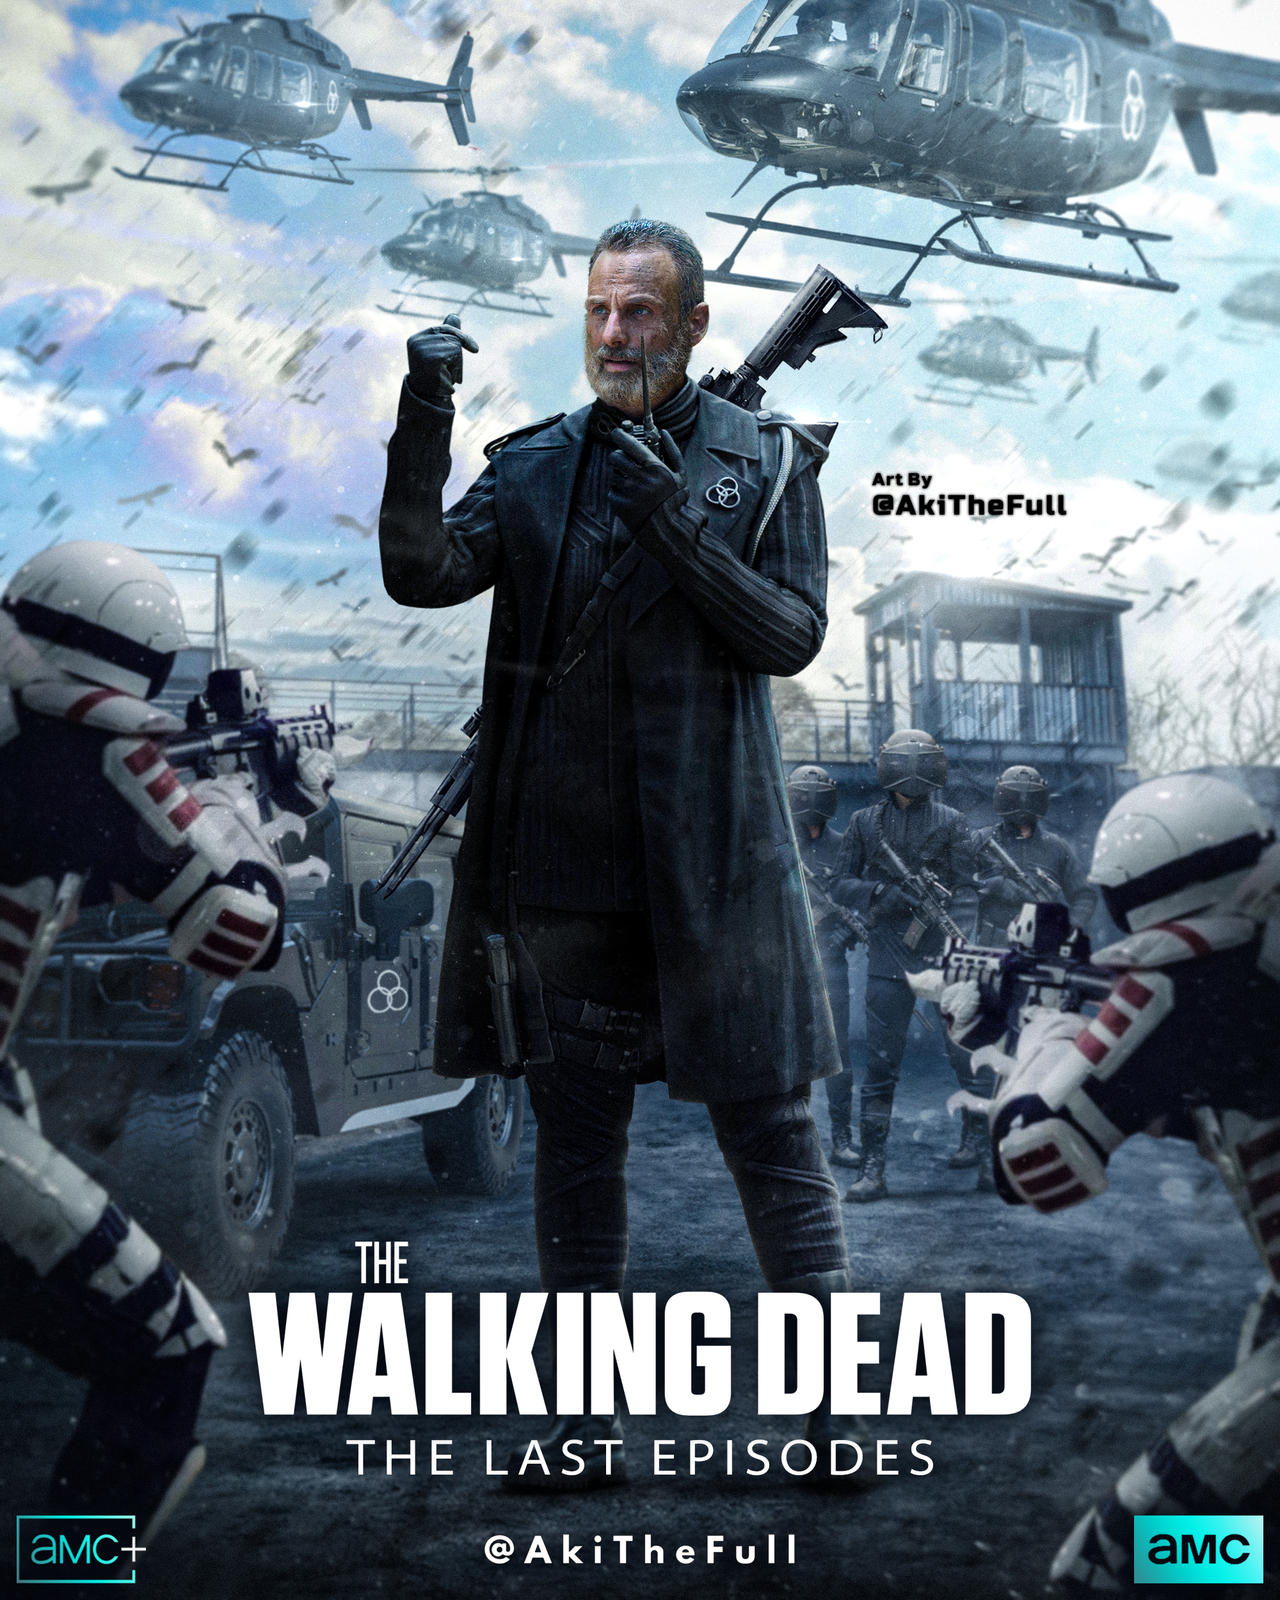 The Walking Dead Finale Rick Grimes Returns Poster by AkiTheFull on